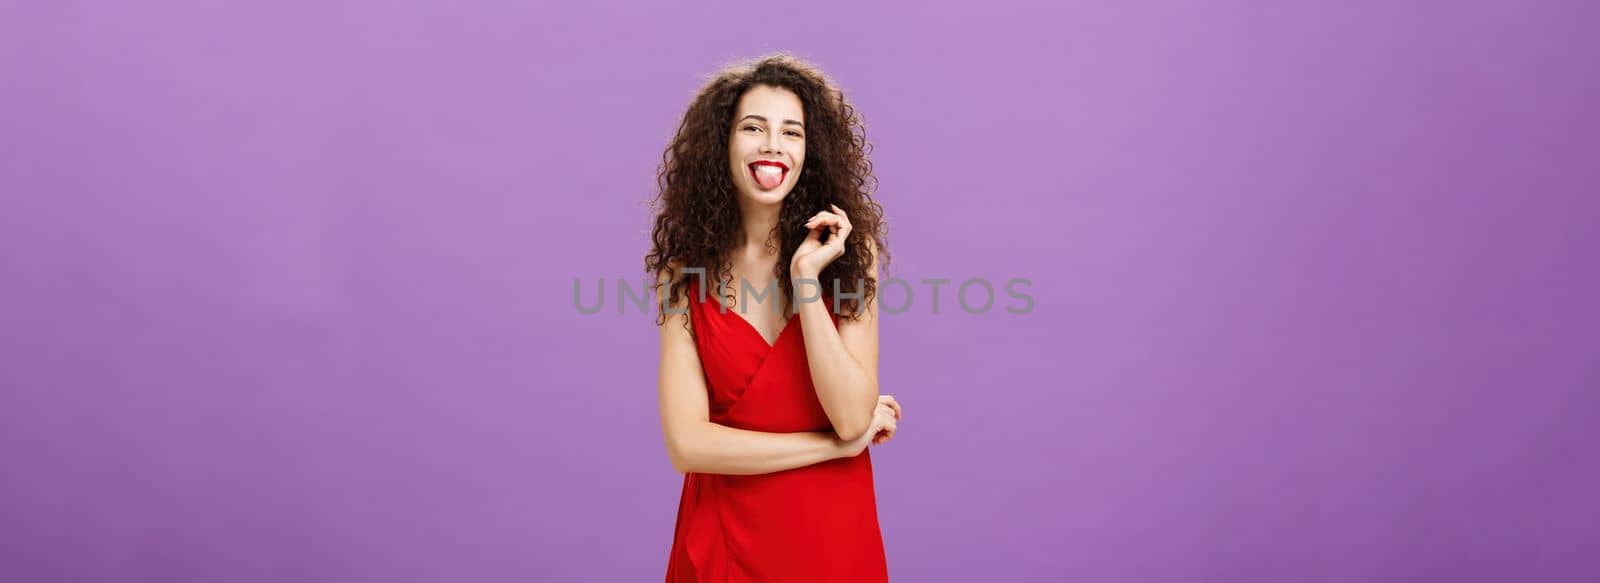 Studio shot of playful and joyful artistic caucasian female. student in red evening dress sticking out tongue happily having fun playing with curl standing over purple background careless and carefree.